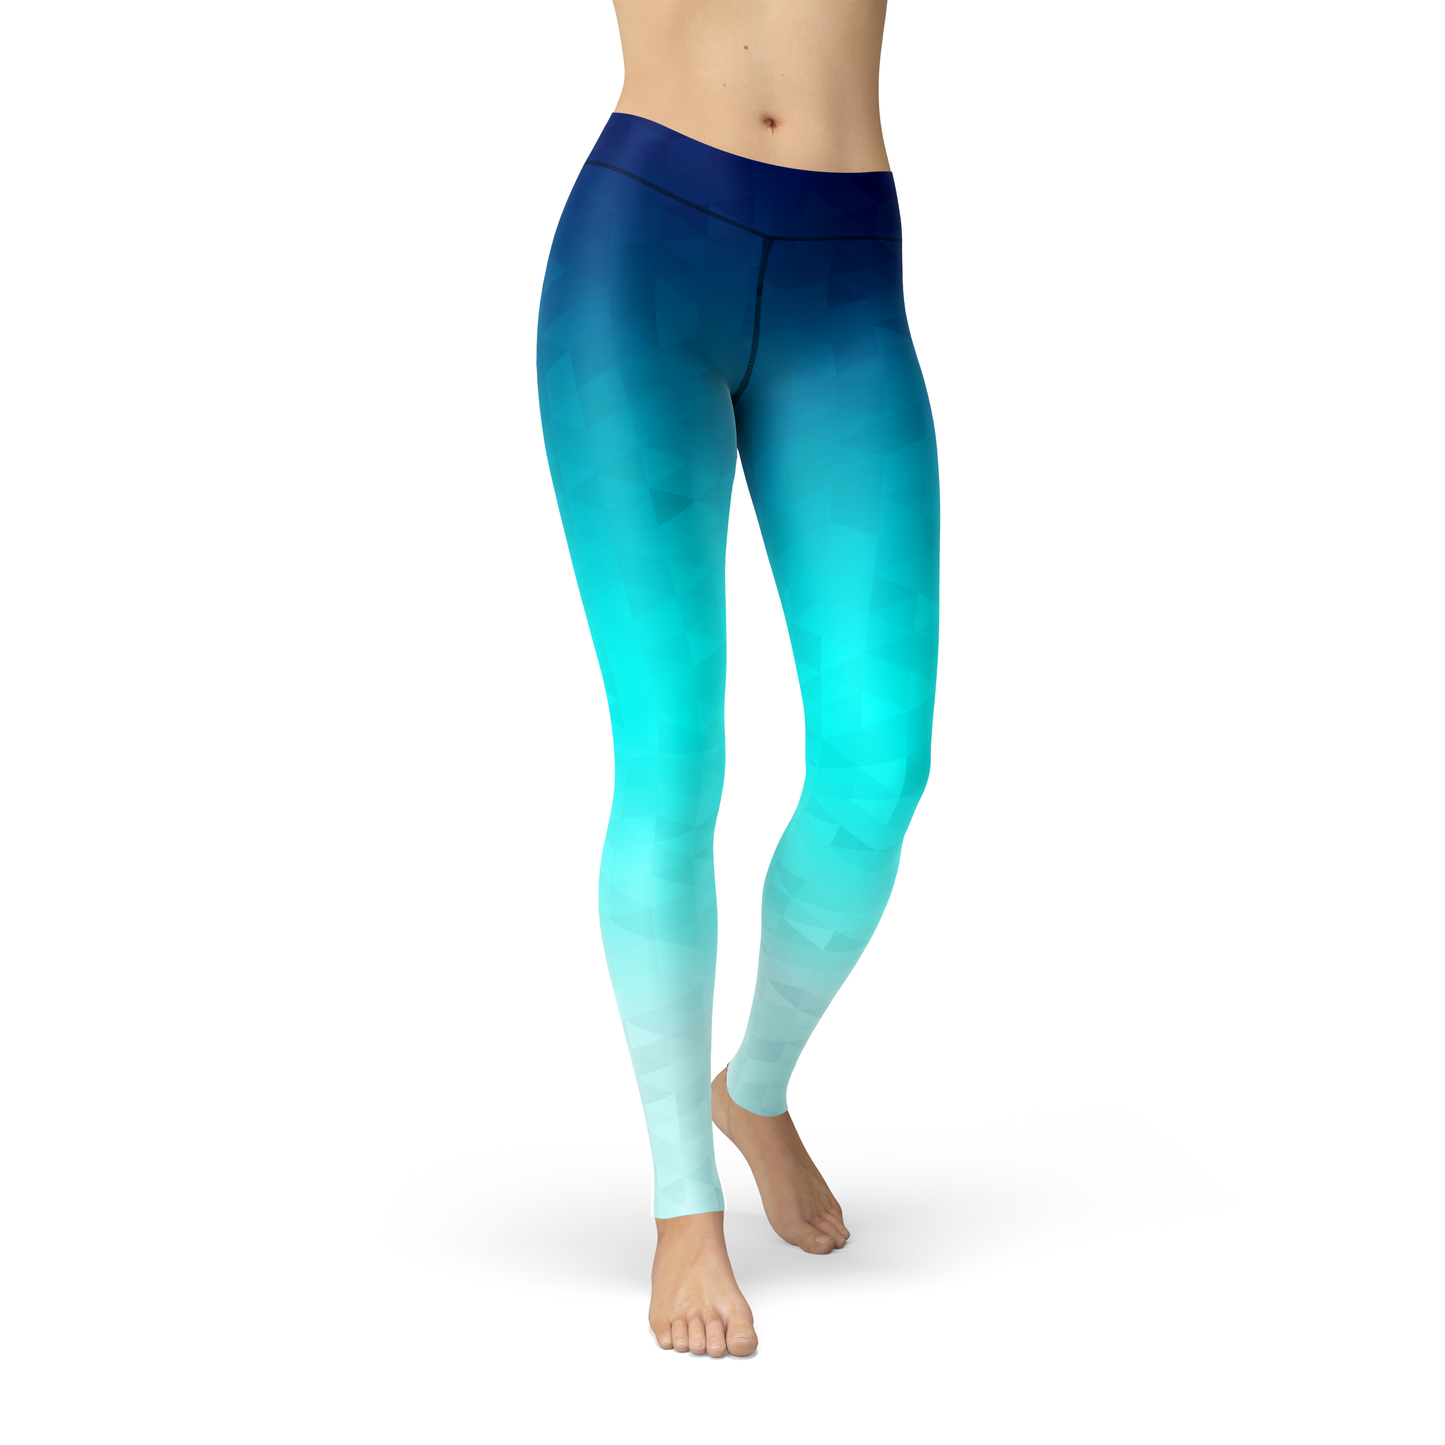 Make waves with our Riptide Legging! Experience style, comfort, and performance in every move you make.